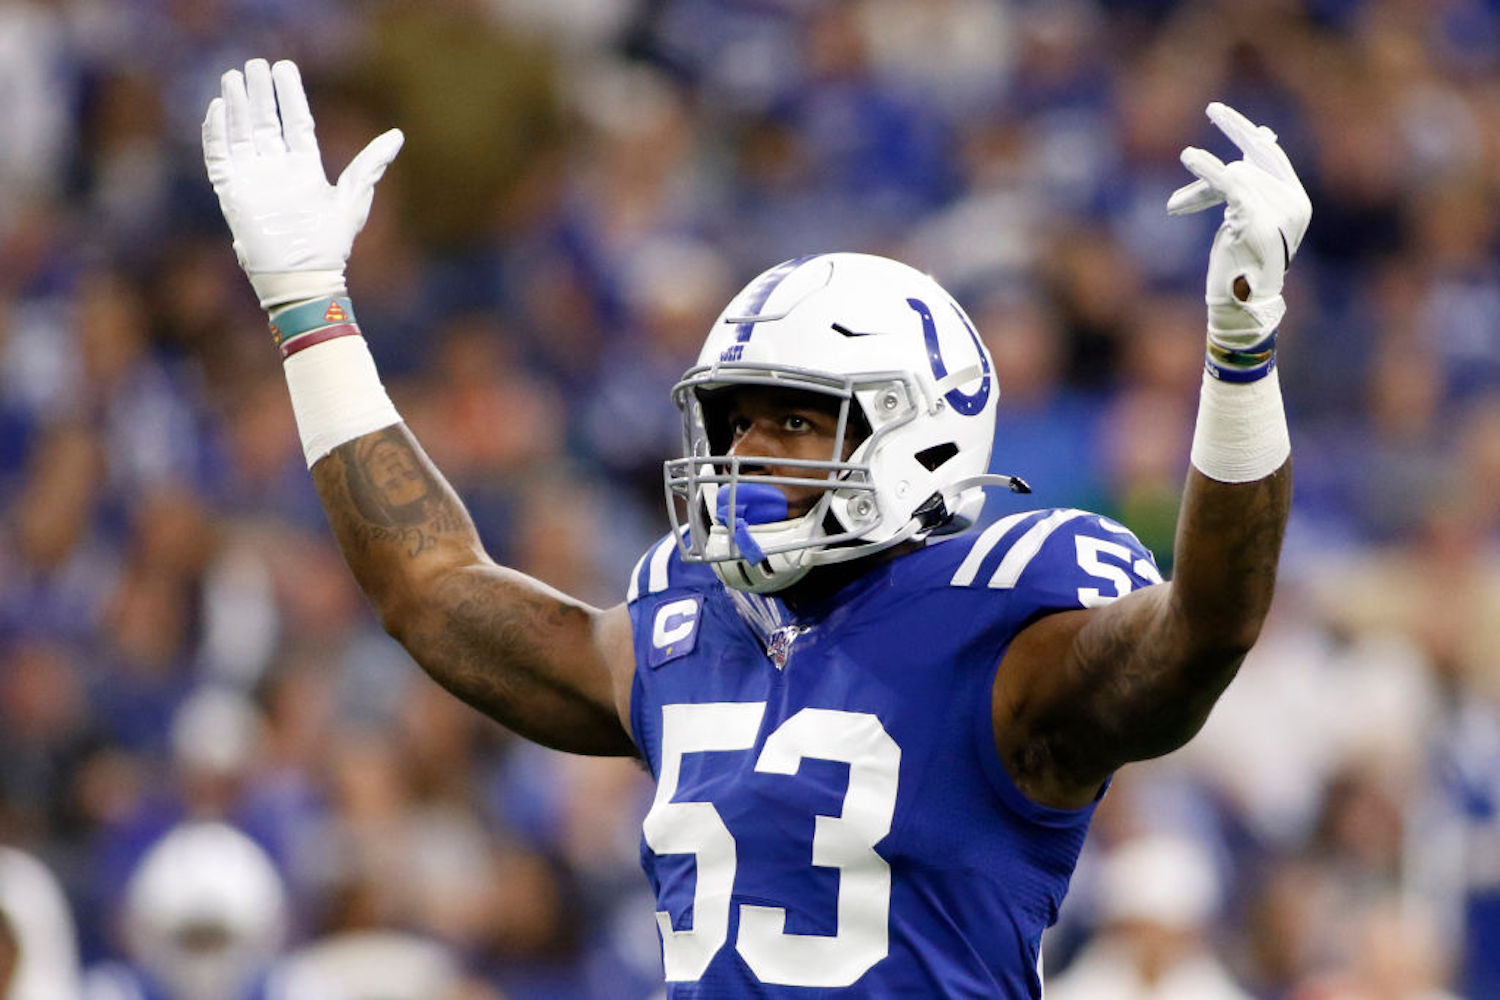 Darius Leonard and the Colts might've won Sunday, but he had some explaining to do when he arrived home without his wedding ring.